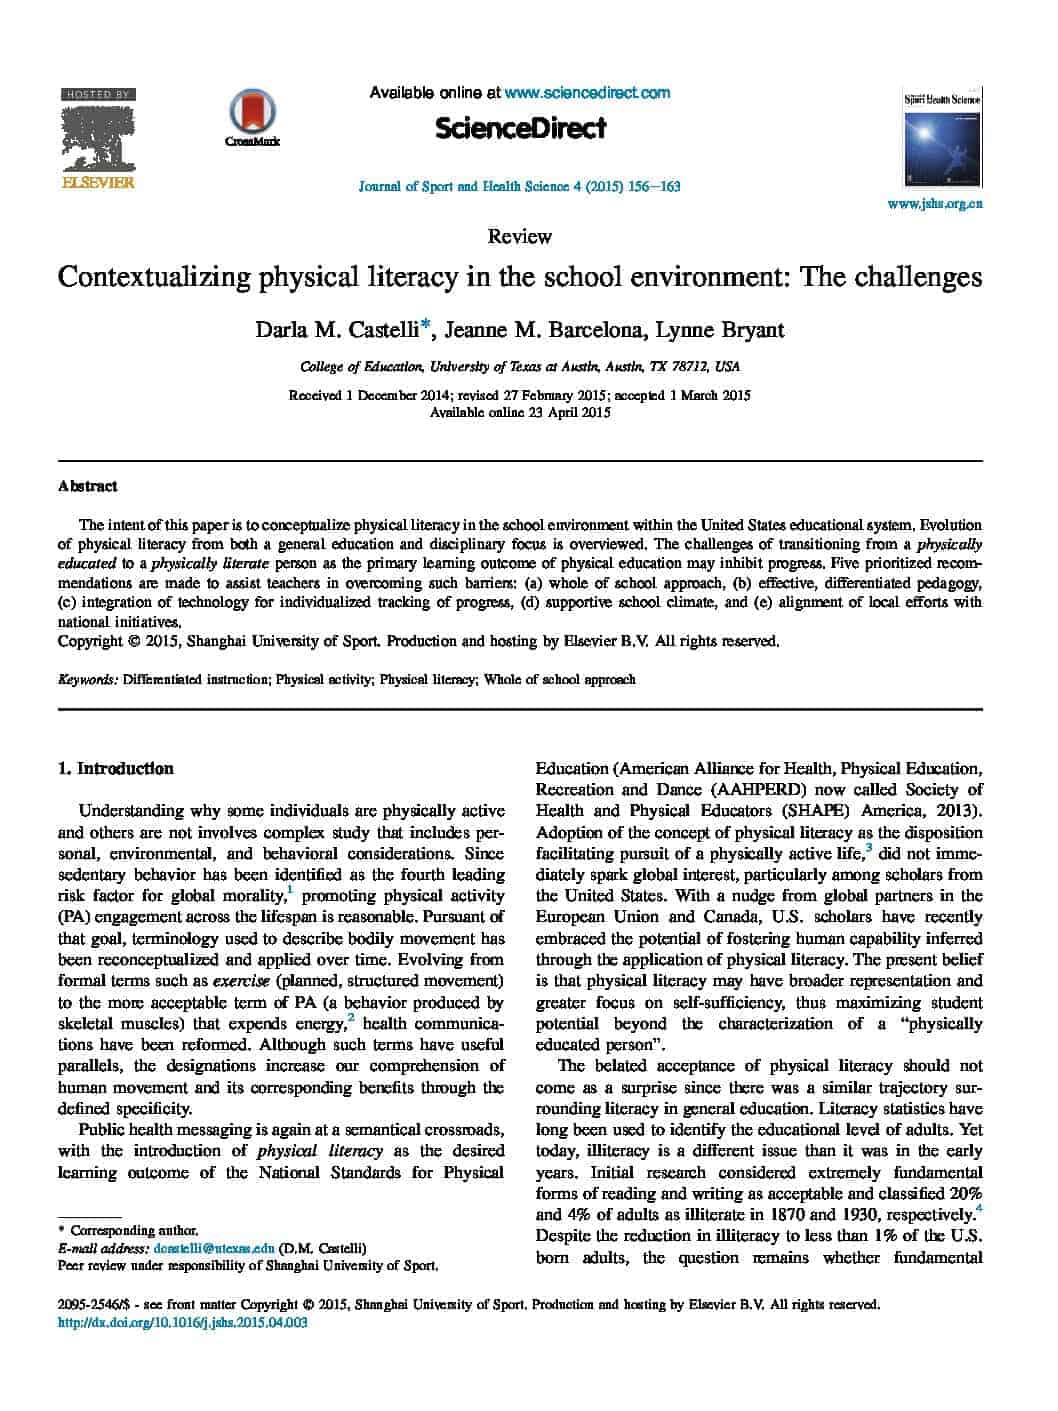 Conceptualising physical literacy in the school environment: The challenges